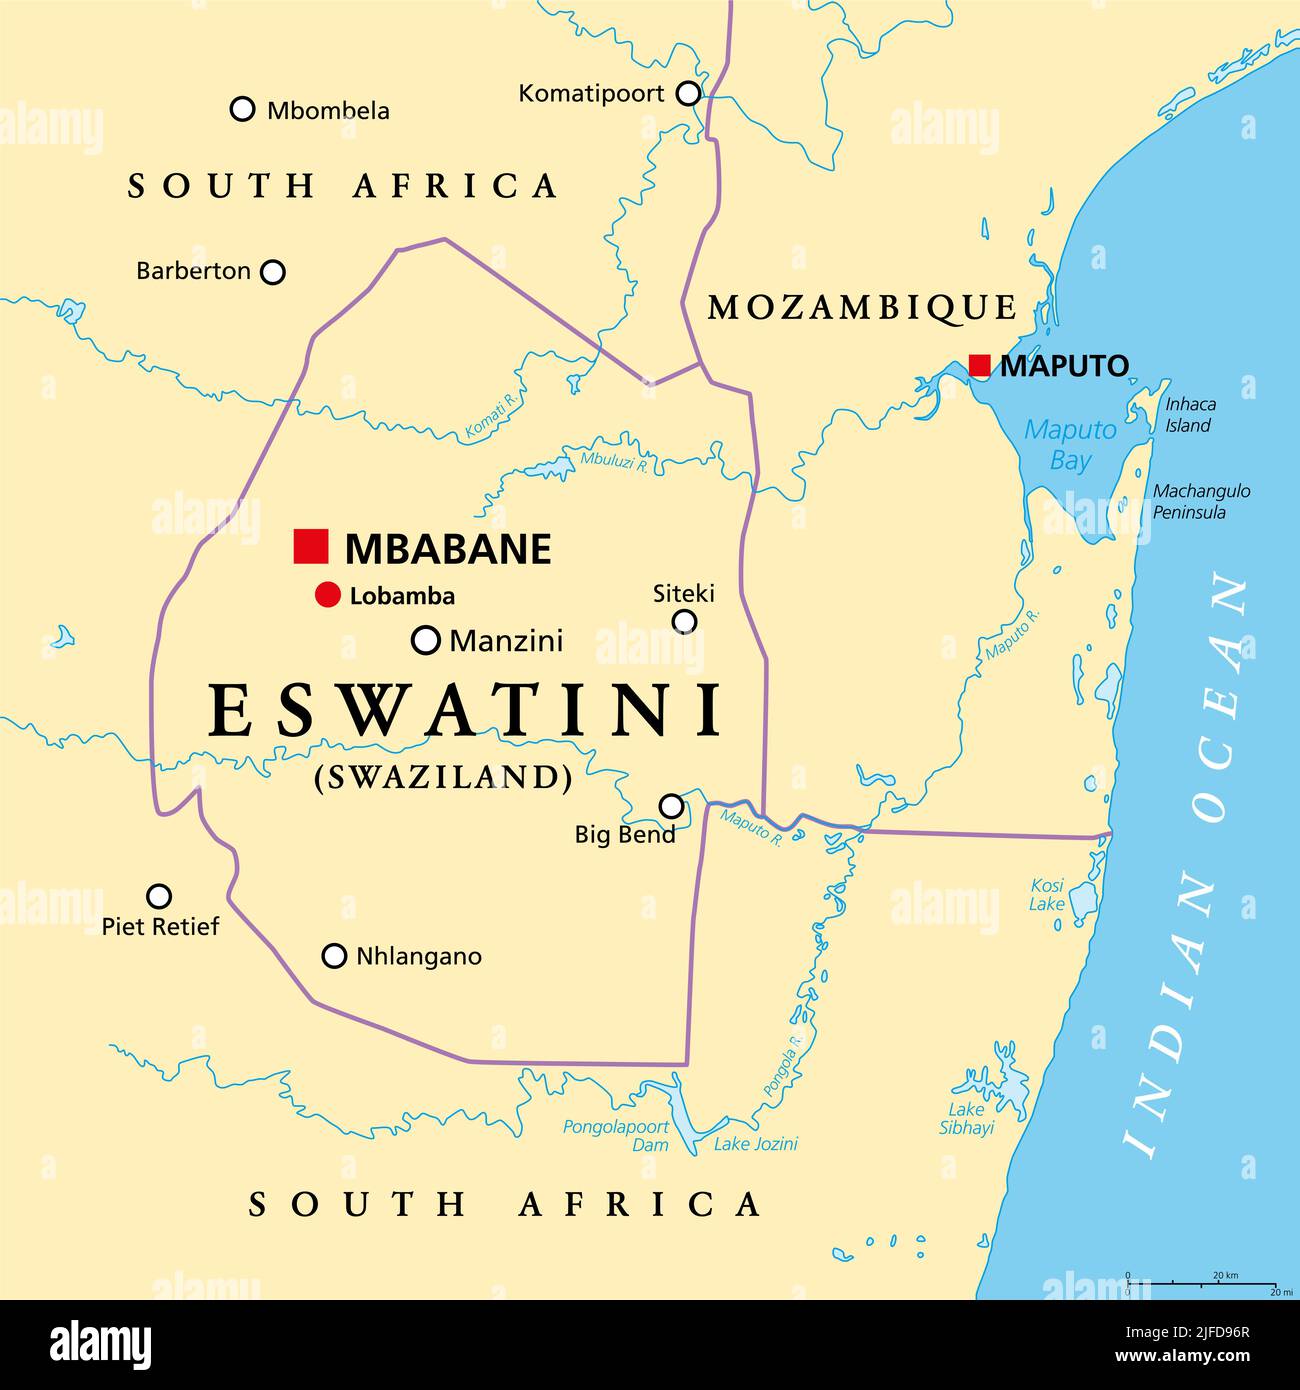 Eswatini, formerly named Swaziland, political map, with the capitals Mbabane and Lobamba. Landlocked country in Southern Africa. Stock Photo